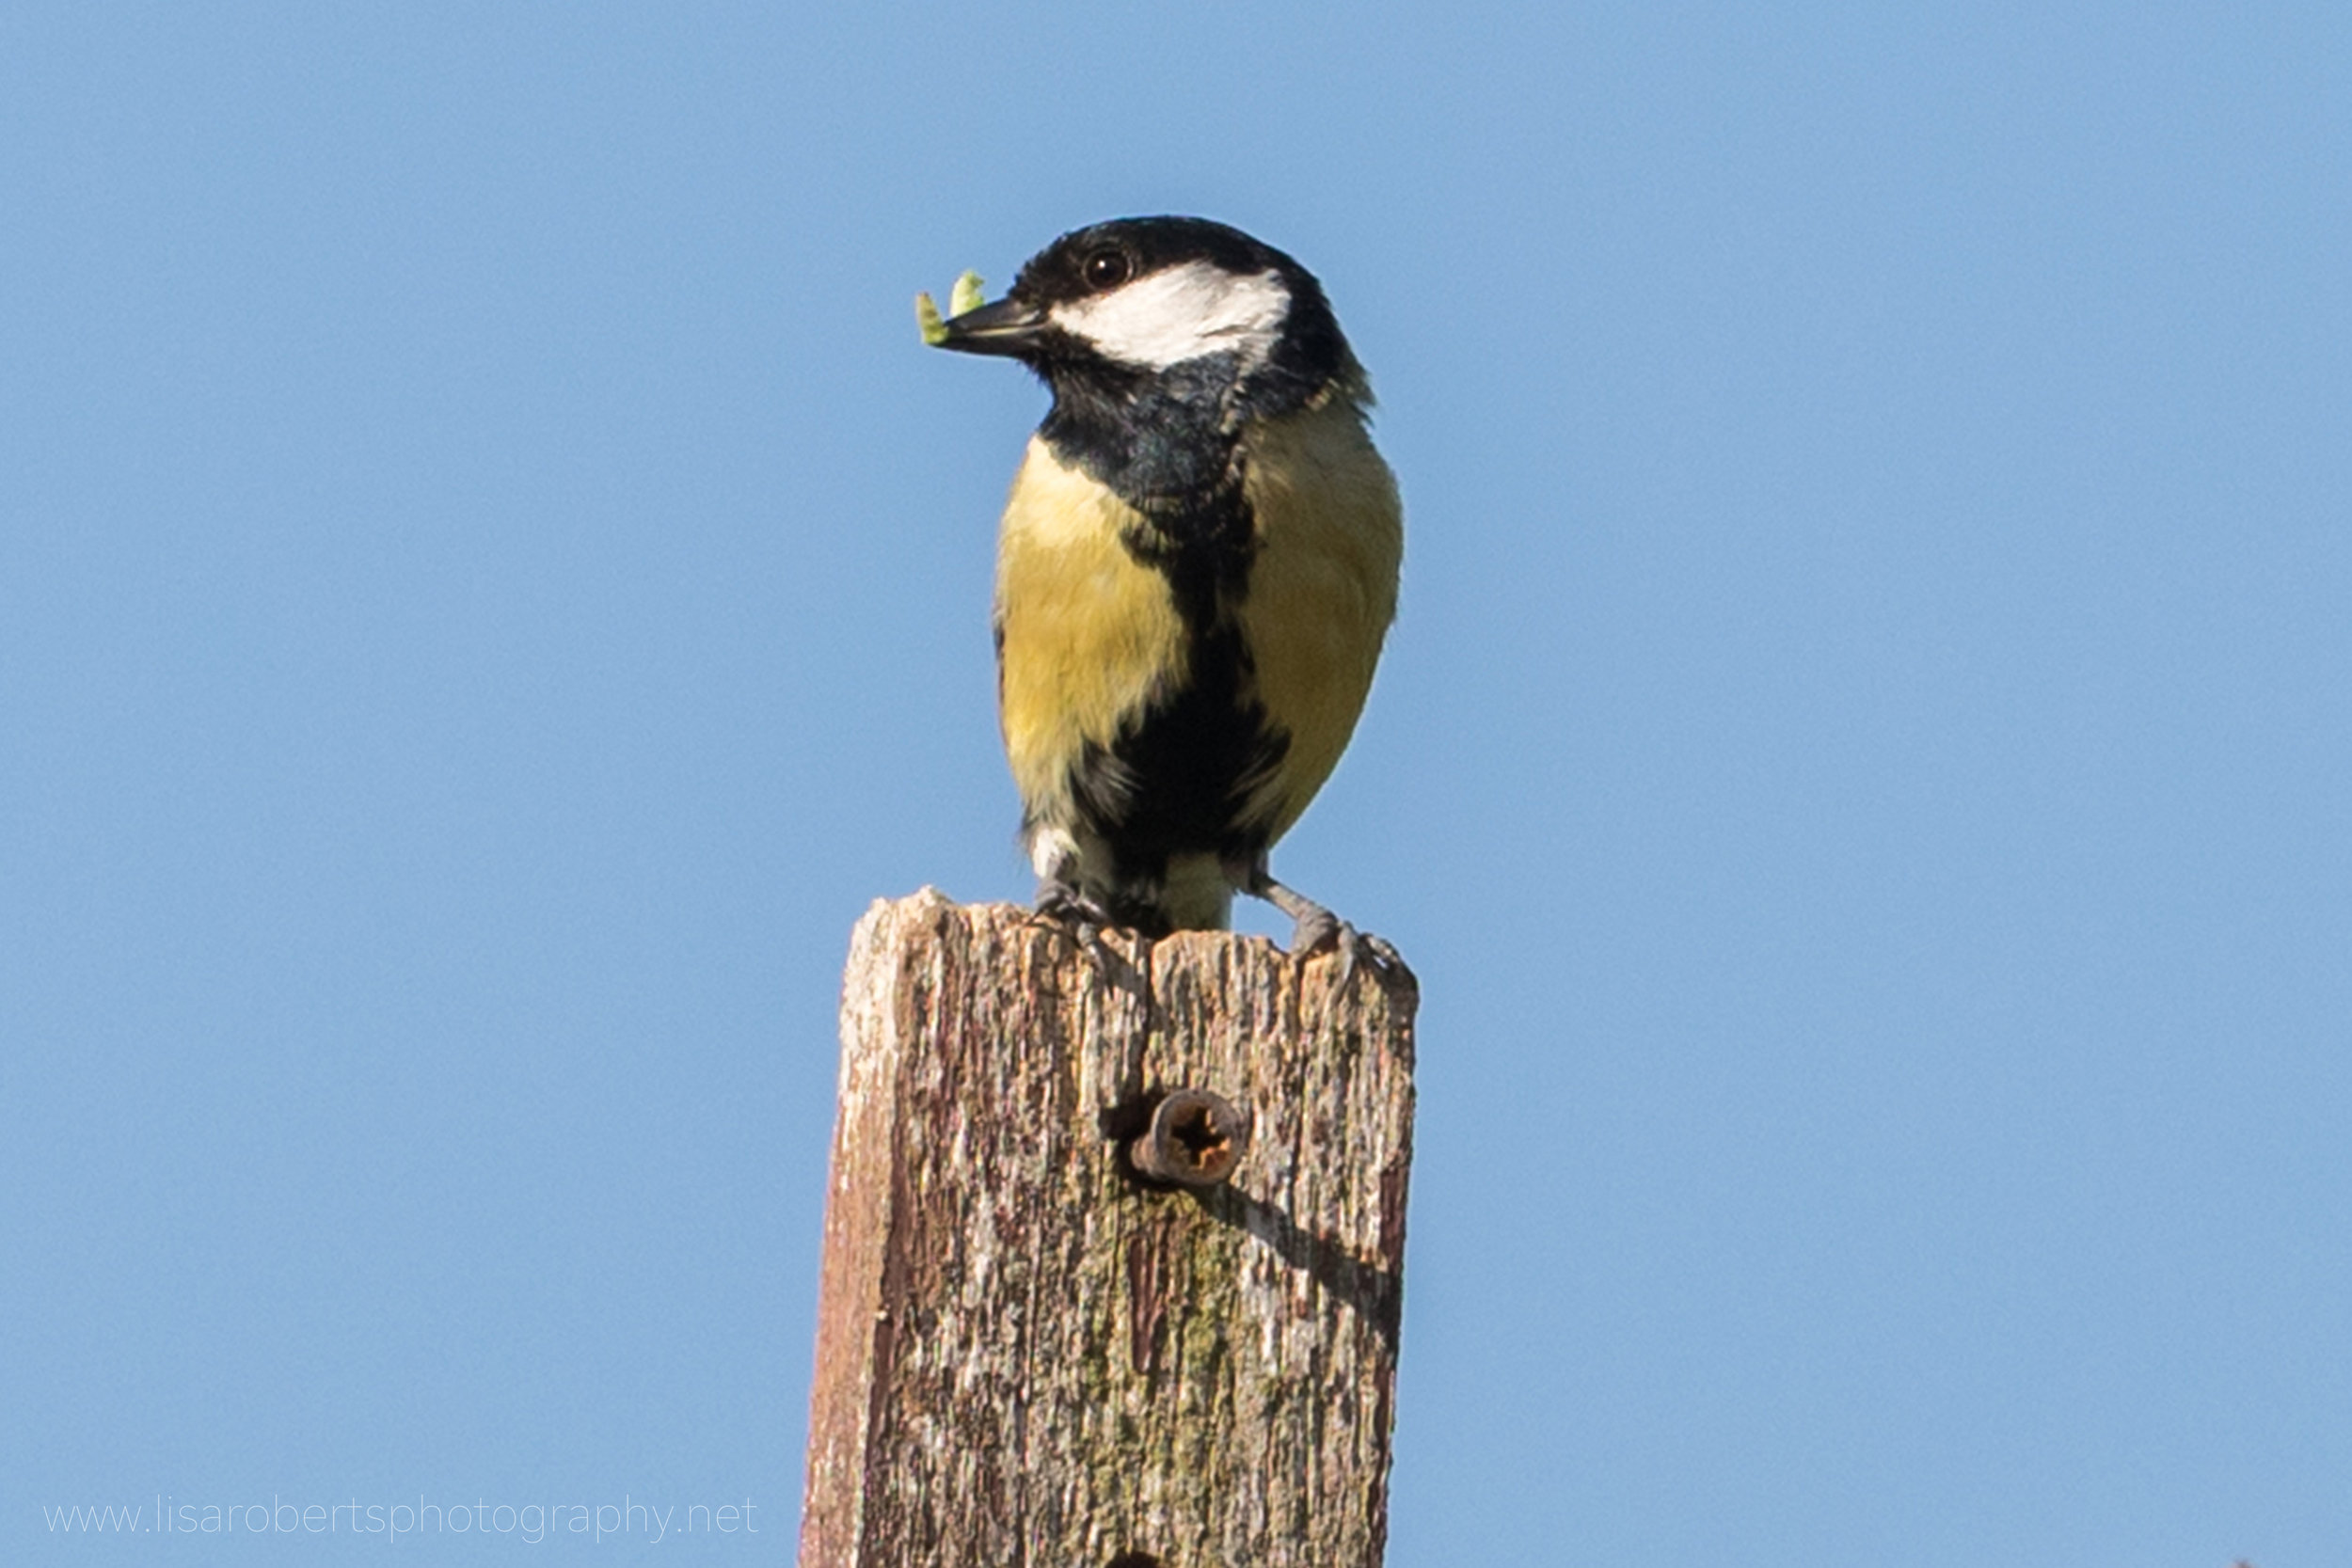  Male Great Tit with grub 